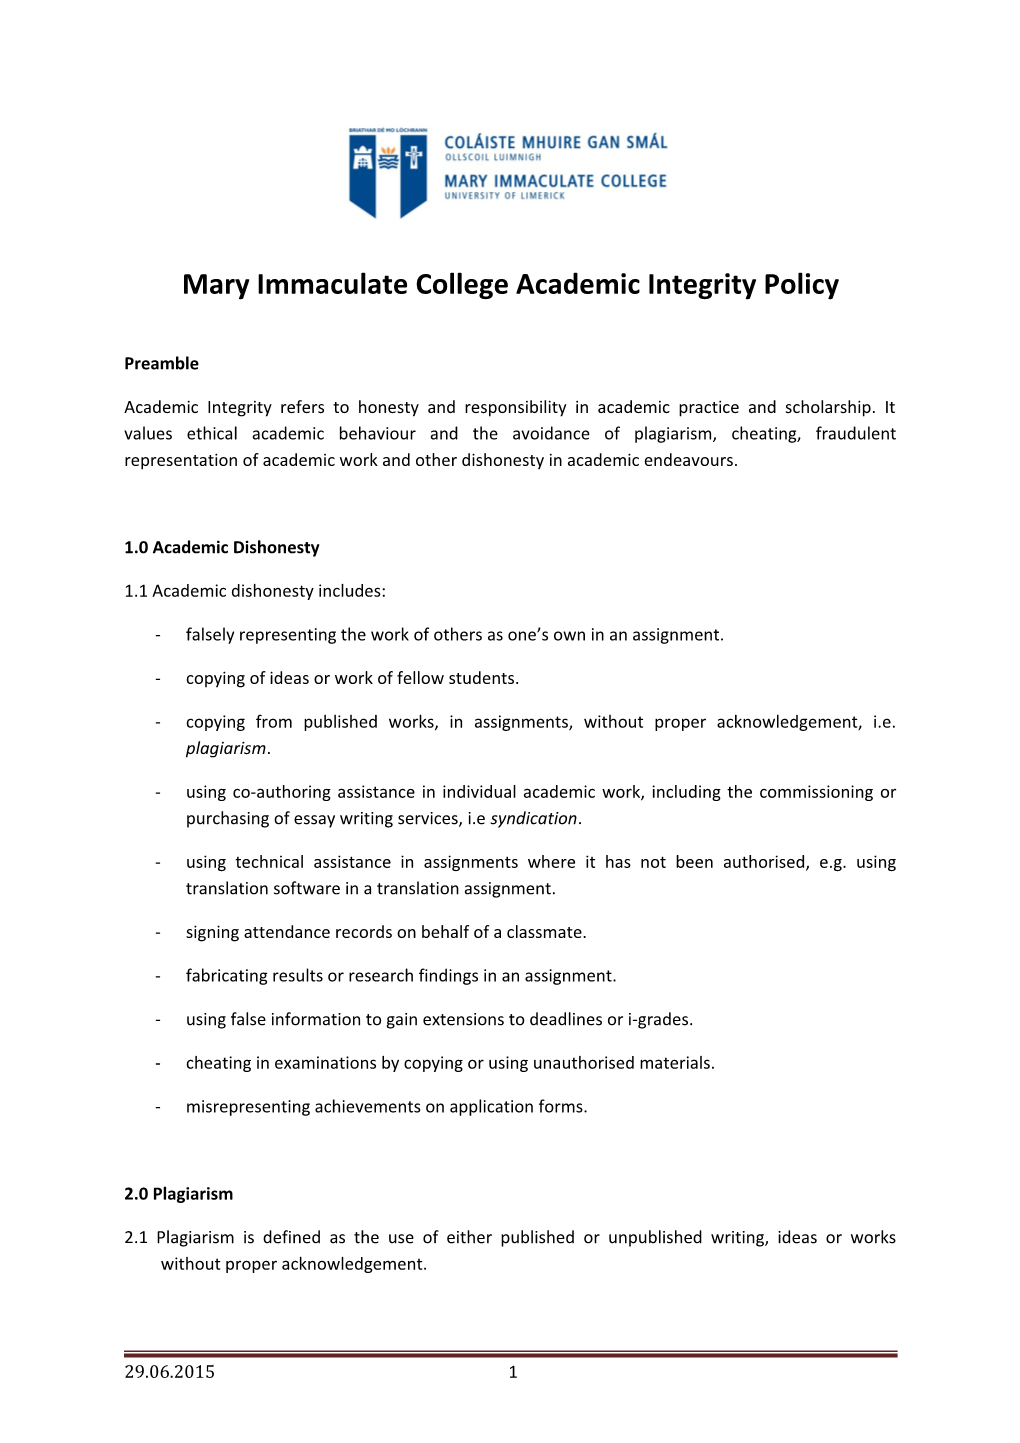 Mary Immaculate College Academic Integrity Policy